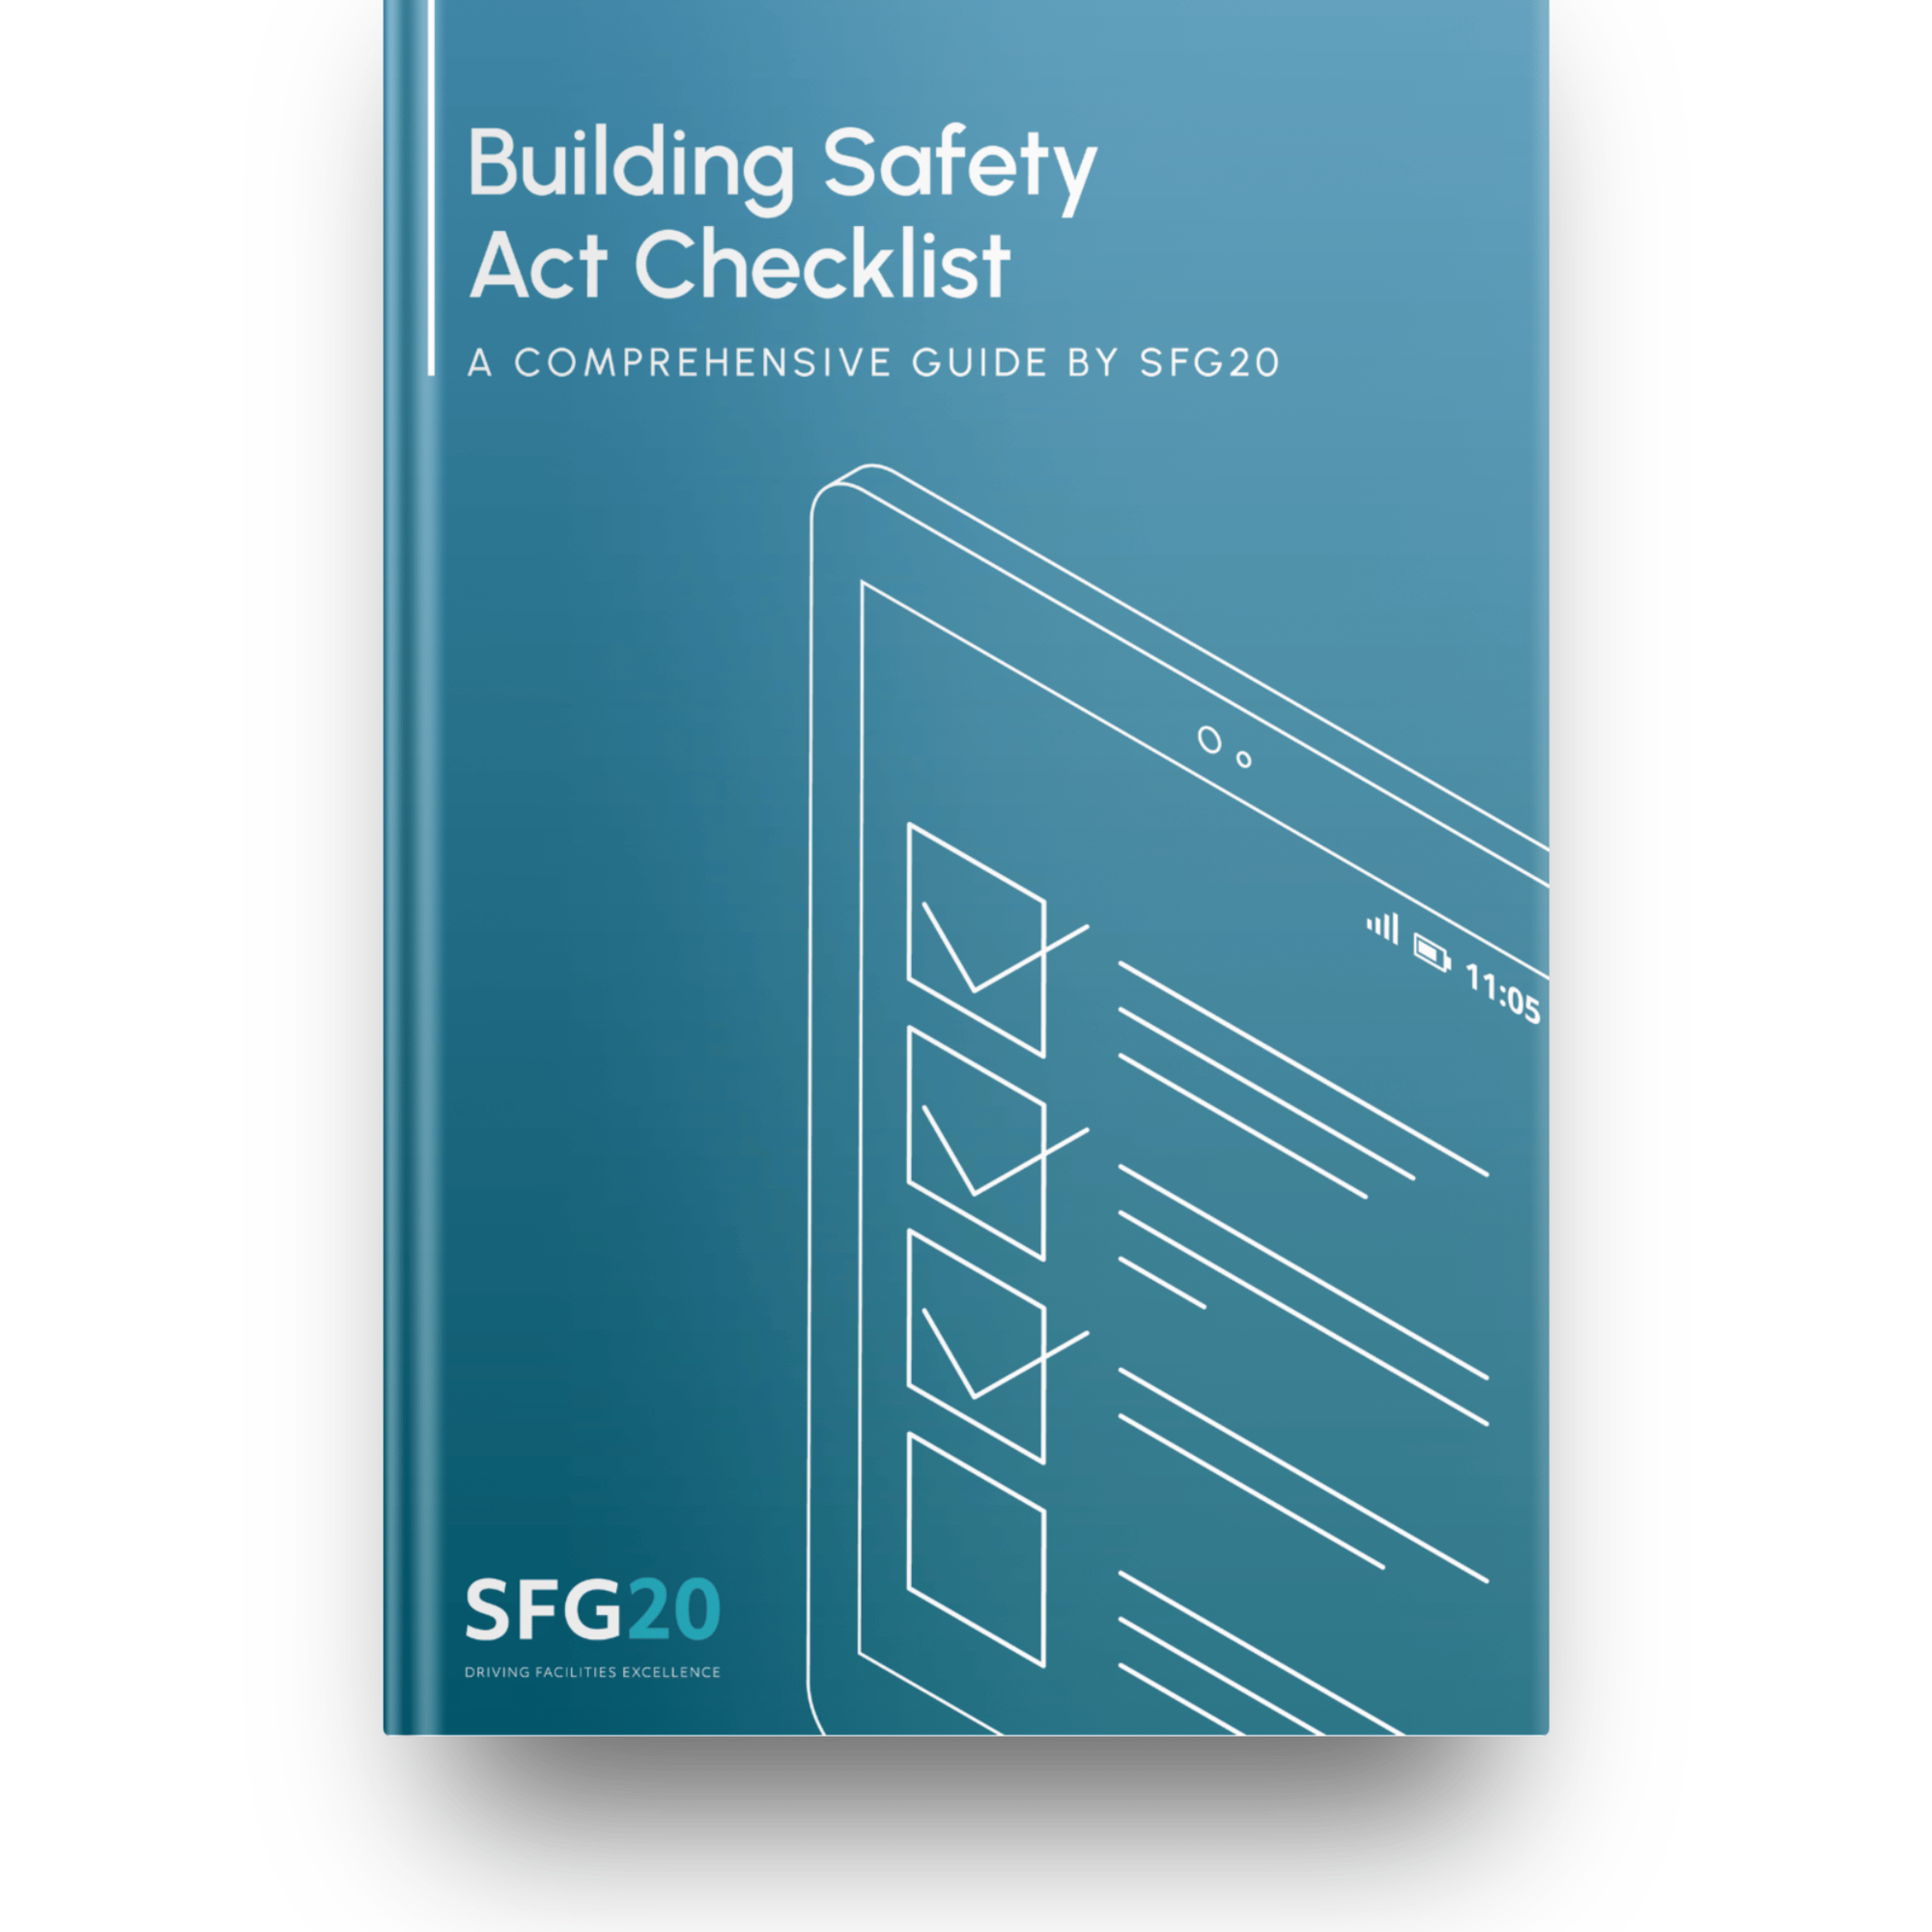 Building Safety Act Checklist